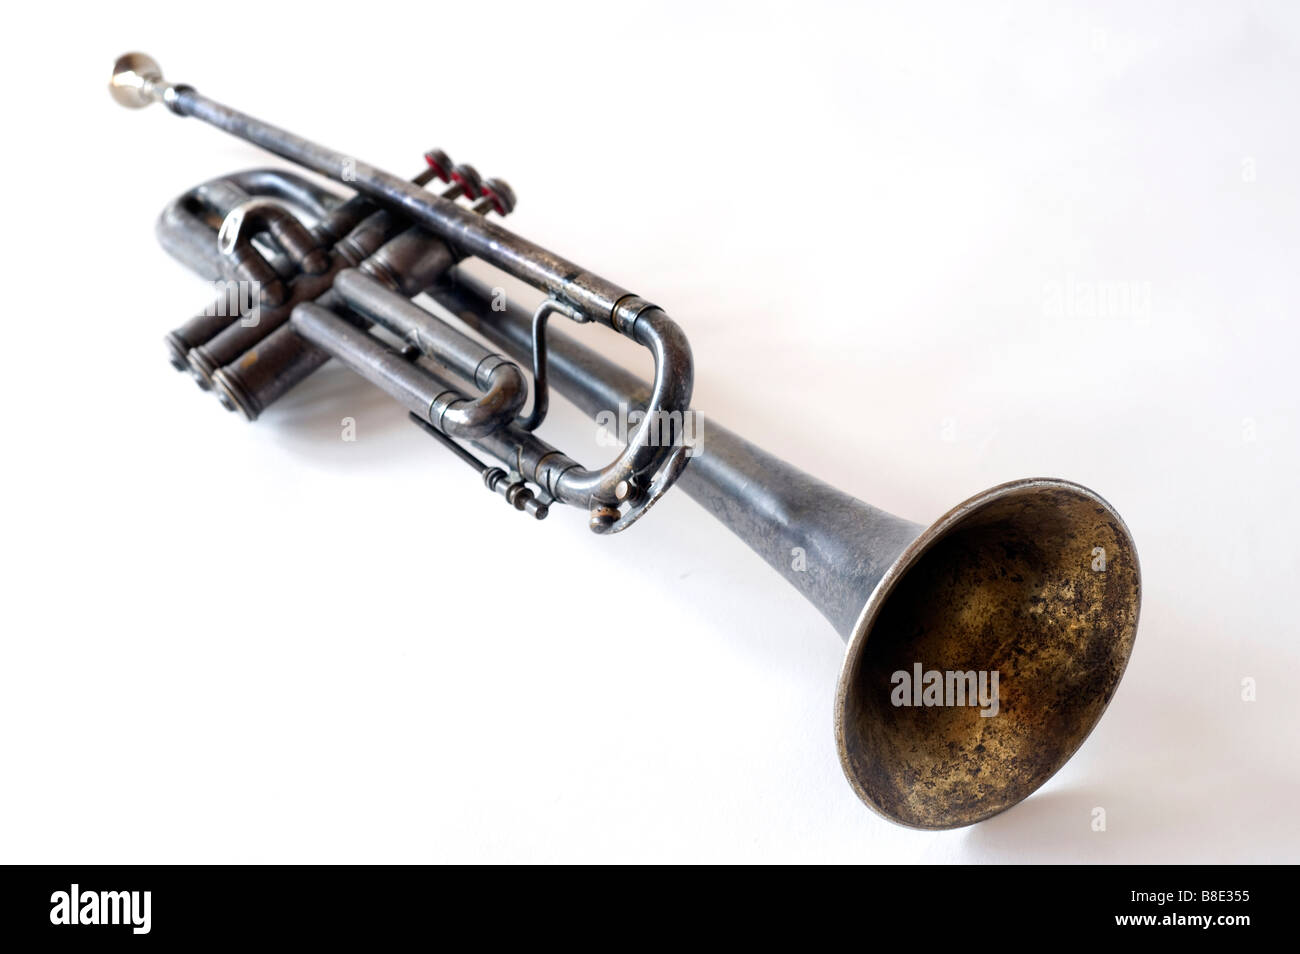 Silhouette image of an old tarnished trumpet on white seamless background. Stock Photo